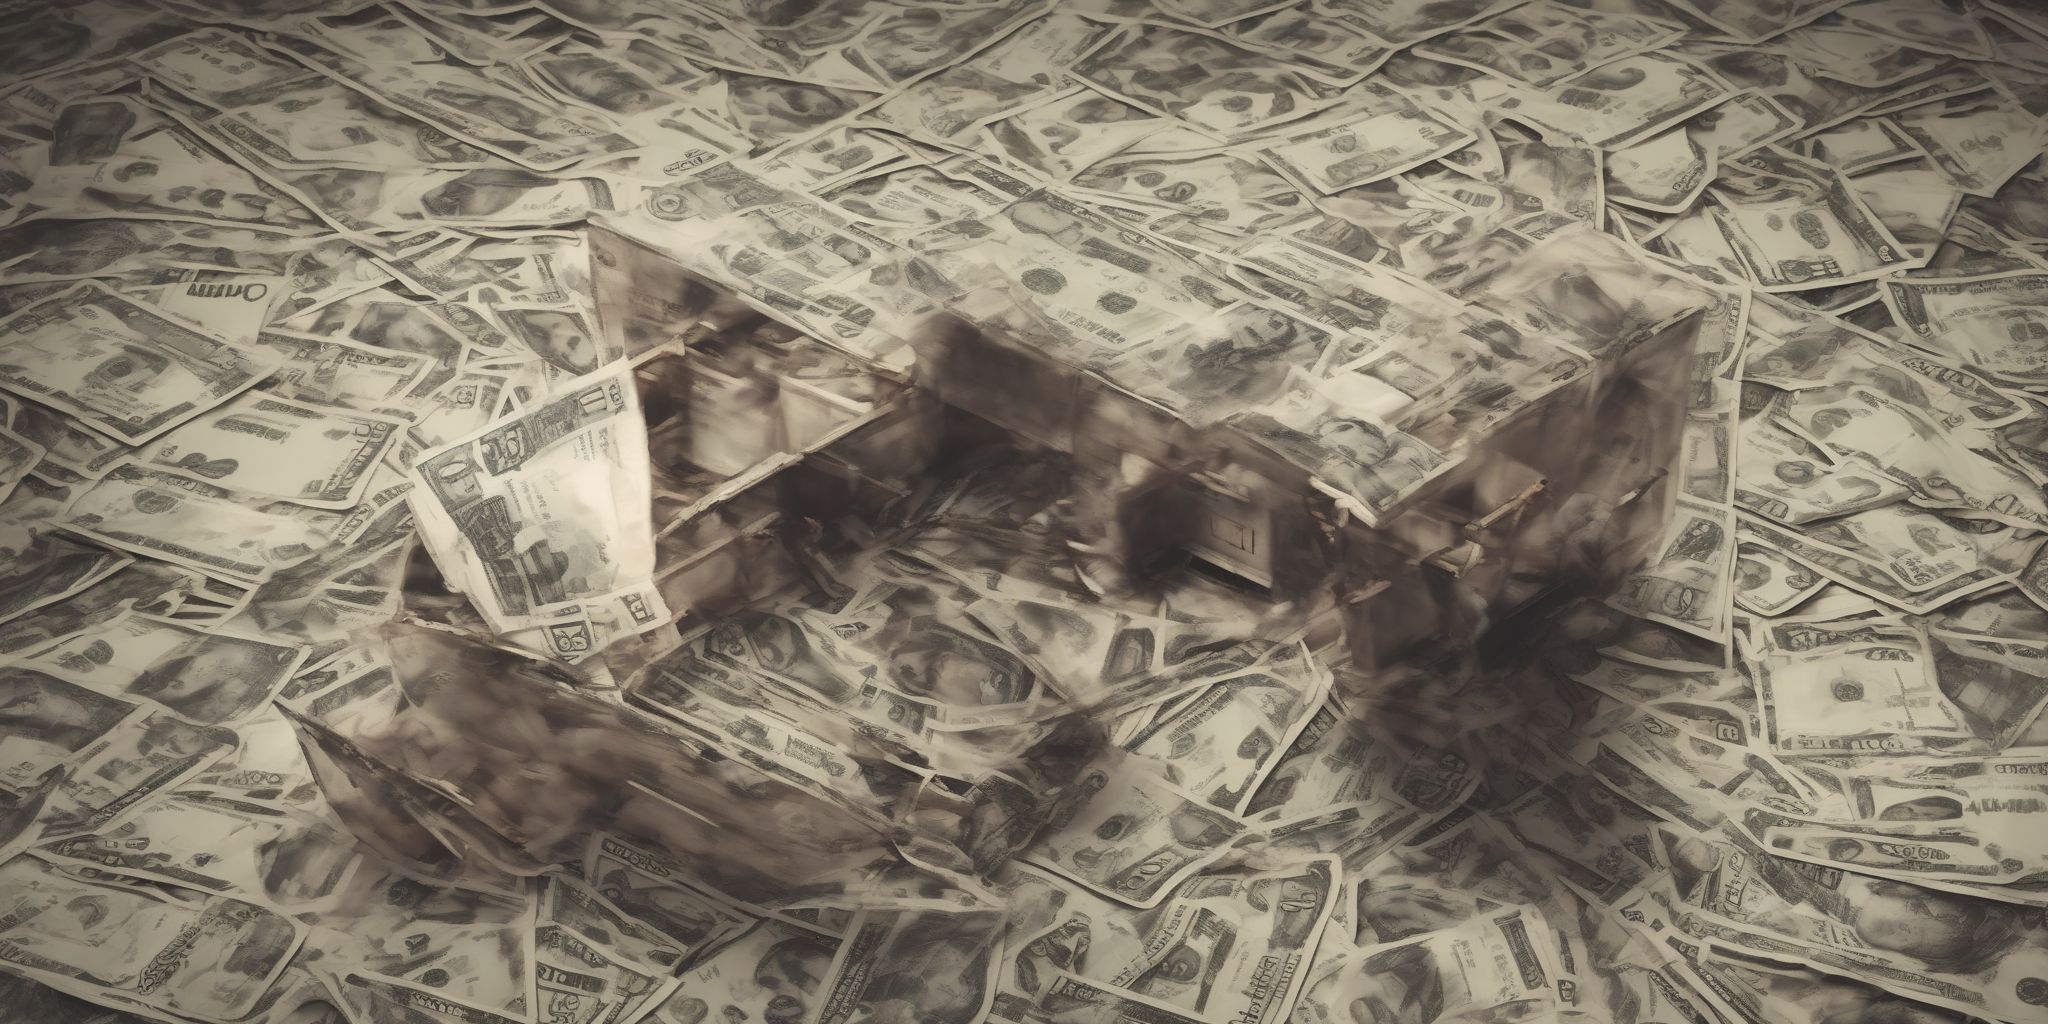 Debt trap  in realistic, photographic style